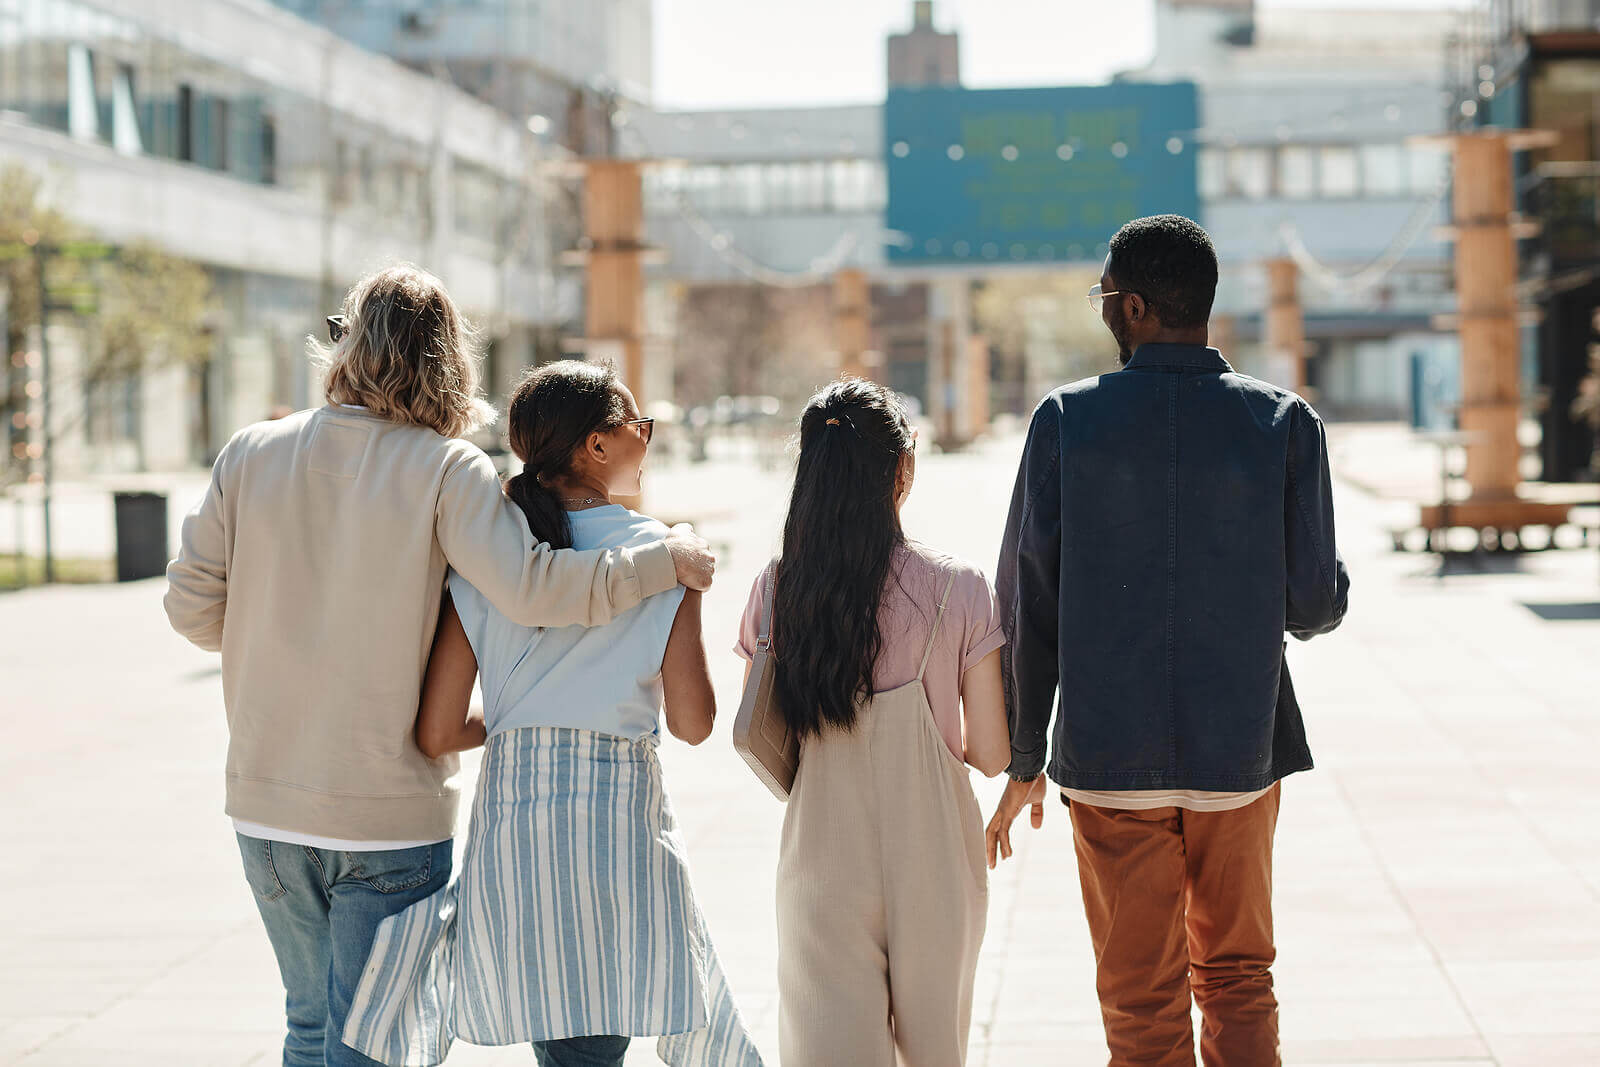 A group of friends walk on the street. Has your social anxiety stopped you from being happy? It might be time for Cognitive Behavioral Therapy in Evanston, IL to see how CBT for anxiety can hep you!